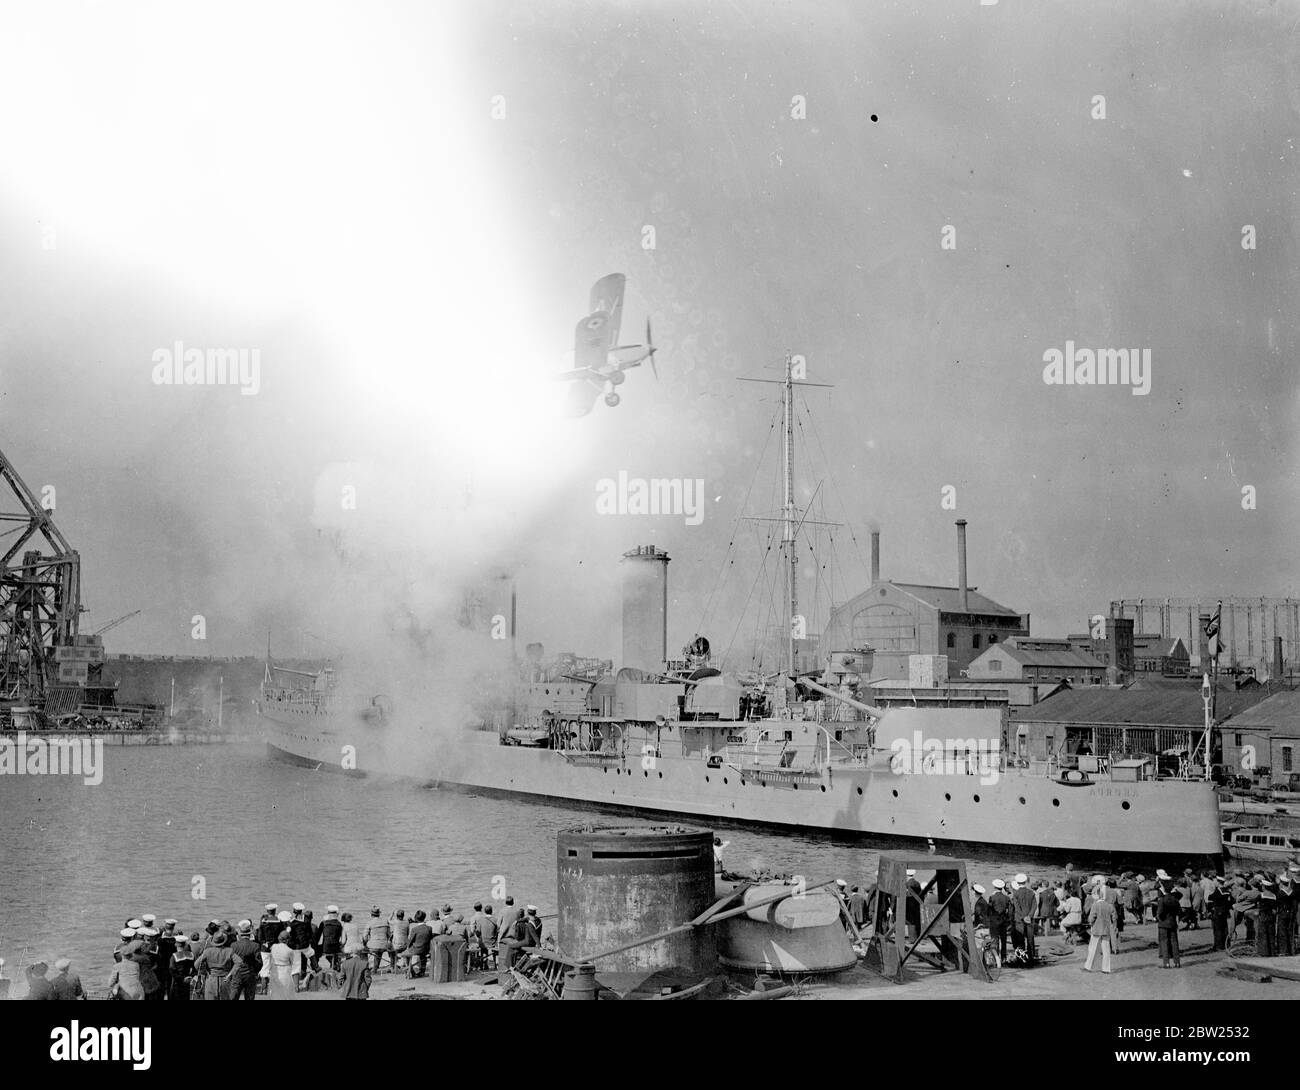 Plane attacks warship in Portsmouth Navy week display. A plane of the Fleet Air Arm flying low over the dockyard as it attacks the warship 'HMS Aurora'during the first day of the Navy week at Portsmouth. Large crowds were in attendance. 31 July 1938 Stock Photo